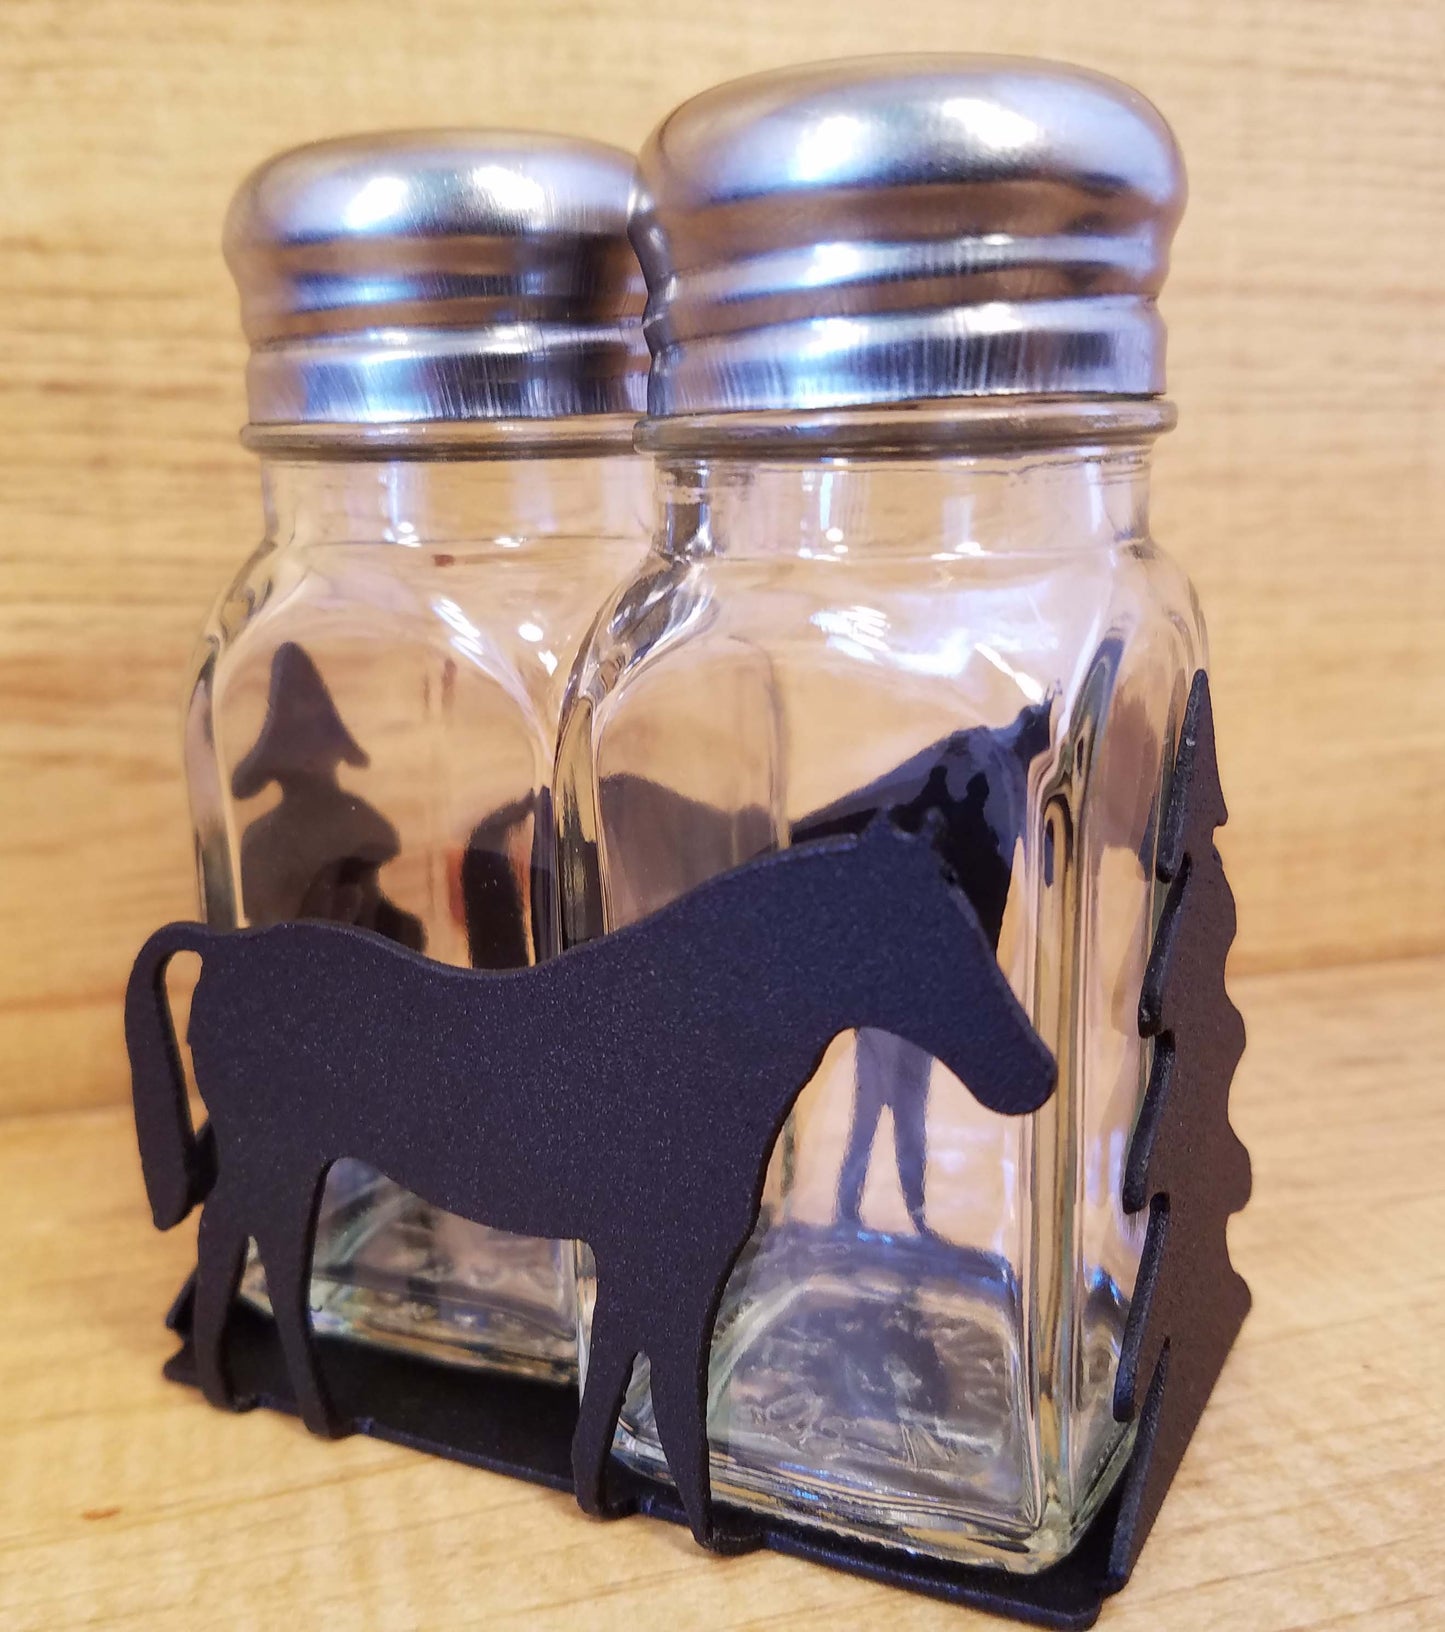 Horse Salt and Pepper Shakers